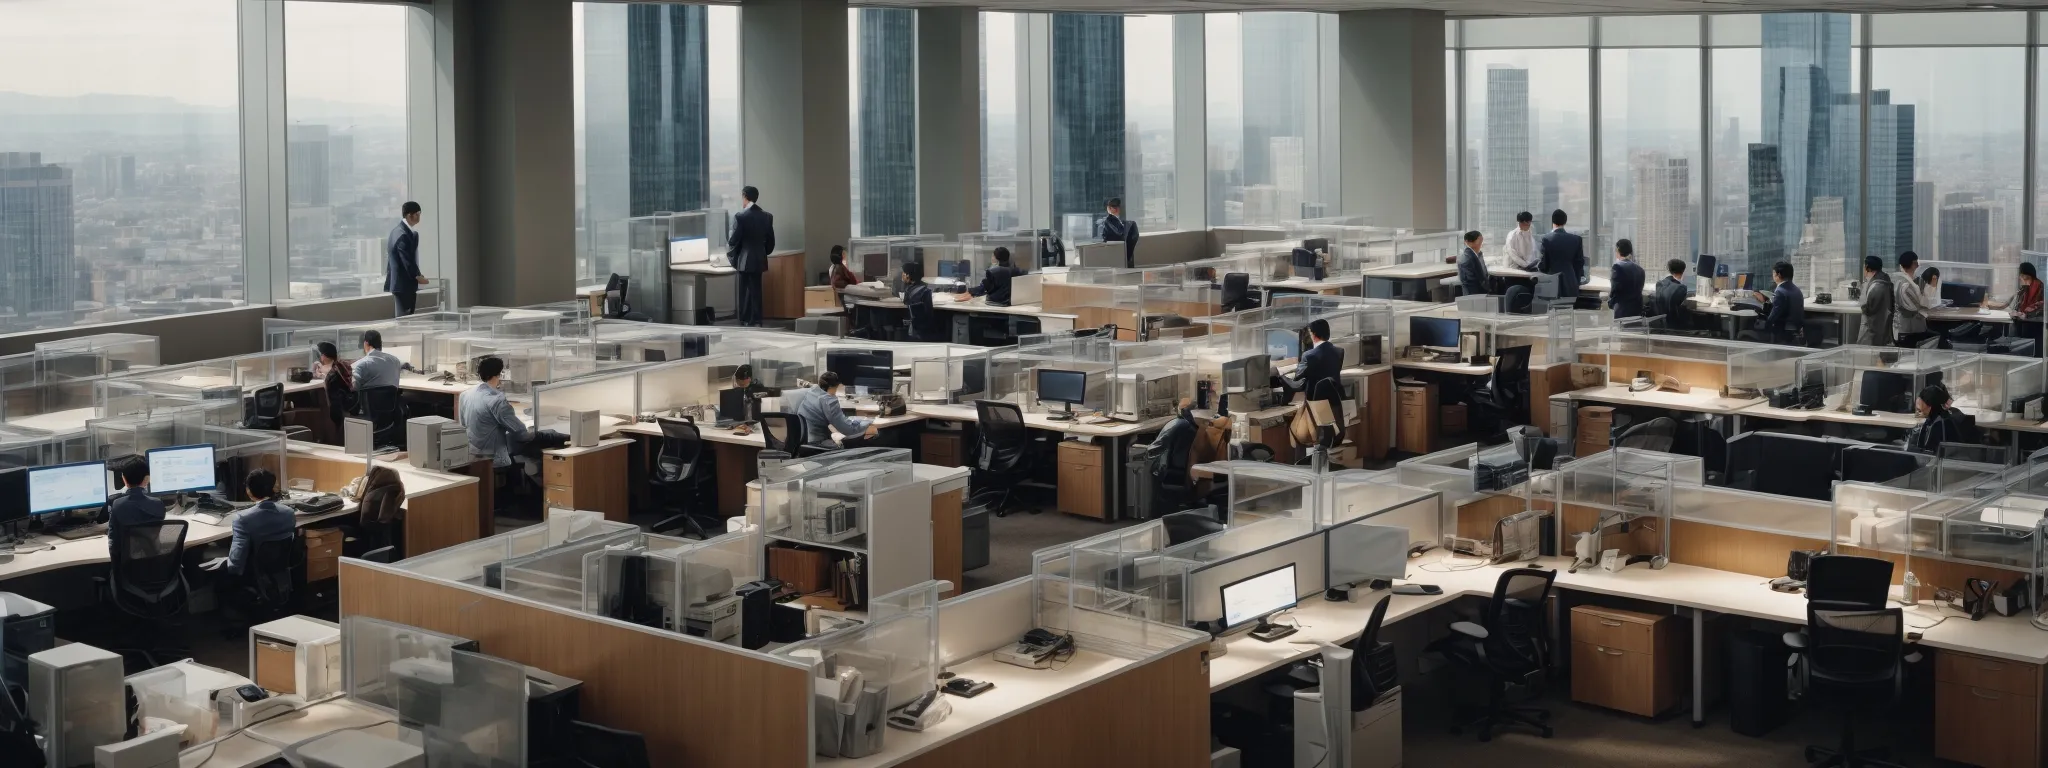 a panoramic view of a bustling corporate office floor with teams collaborating around large desks, against a backdrop of city skyscrapers.